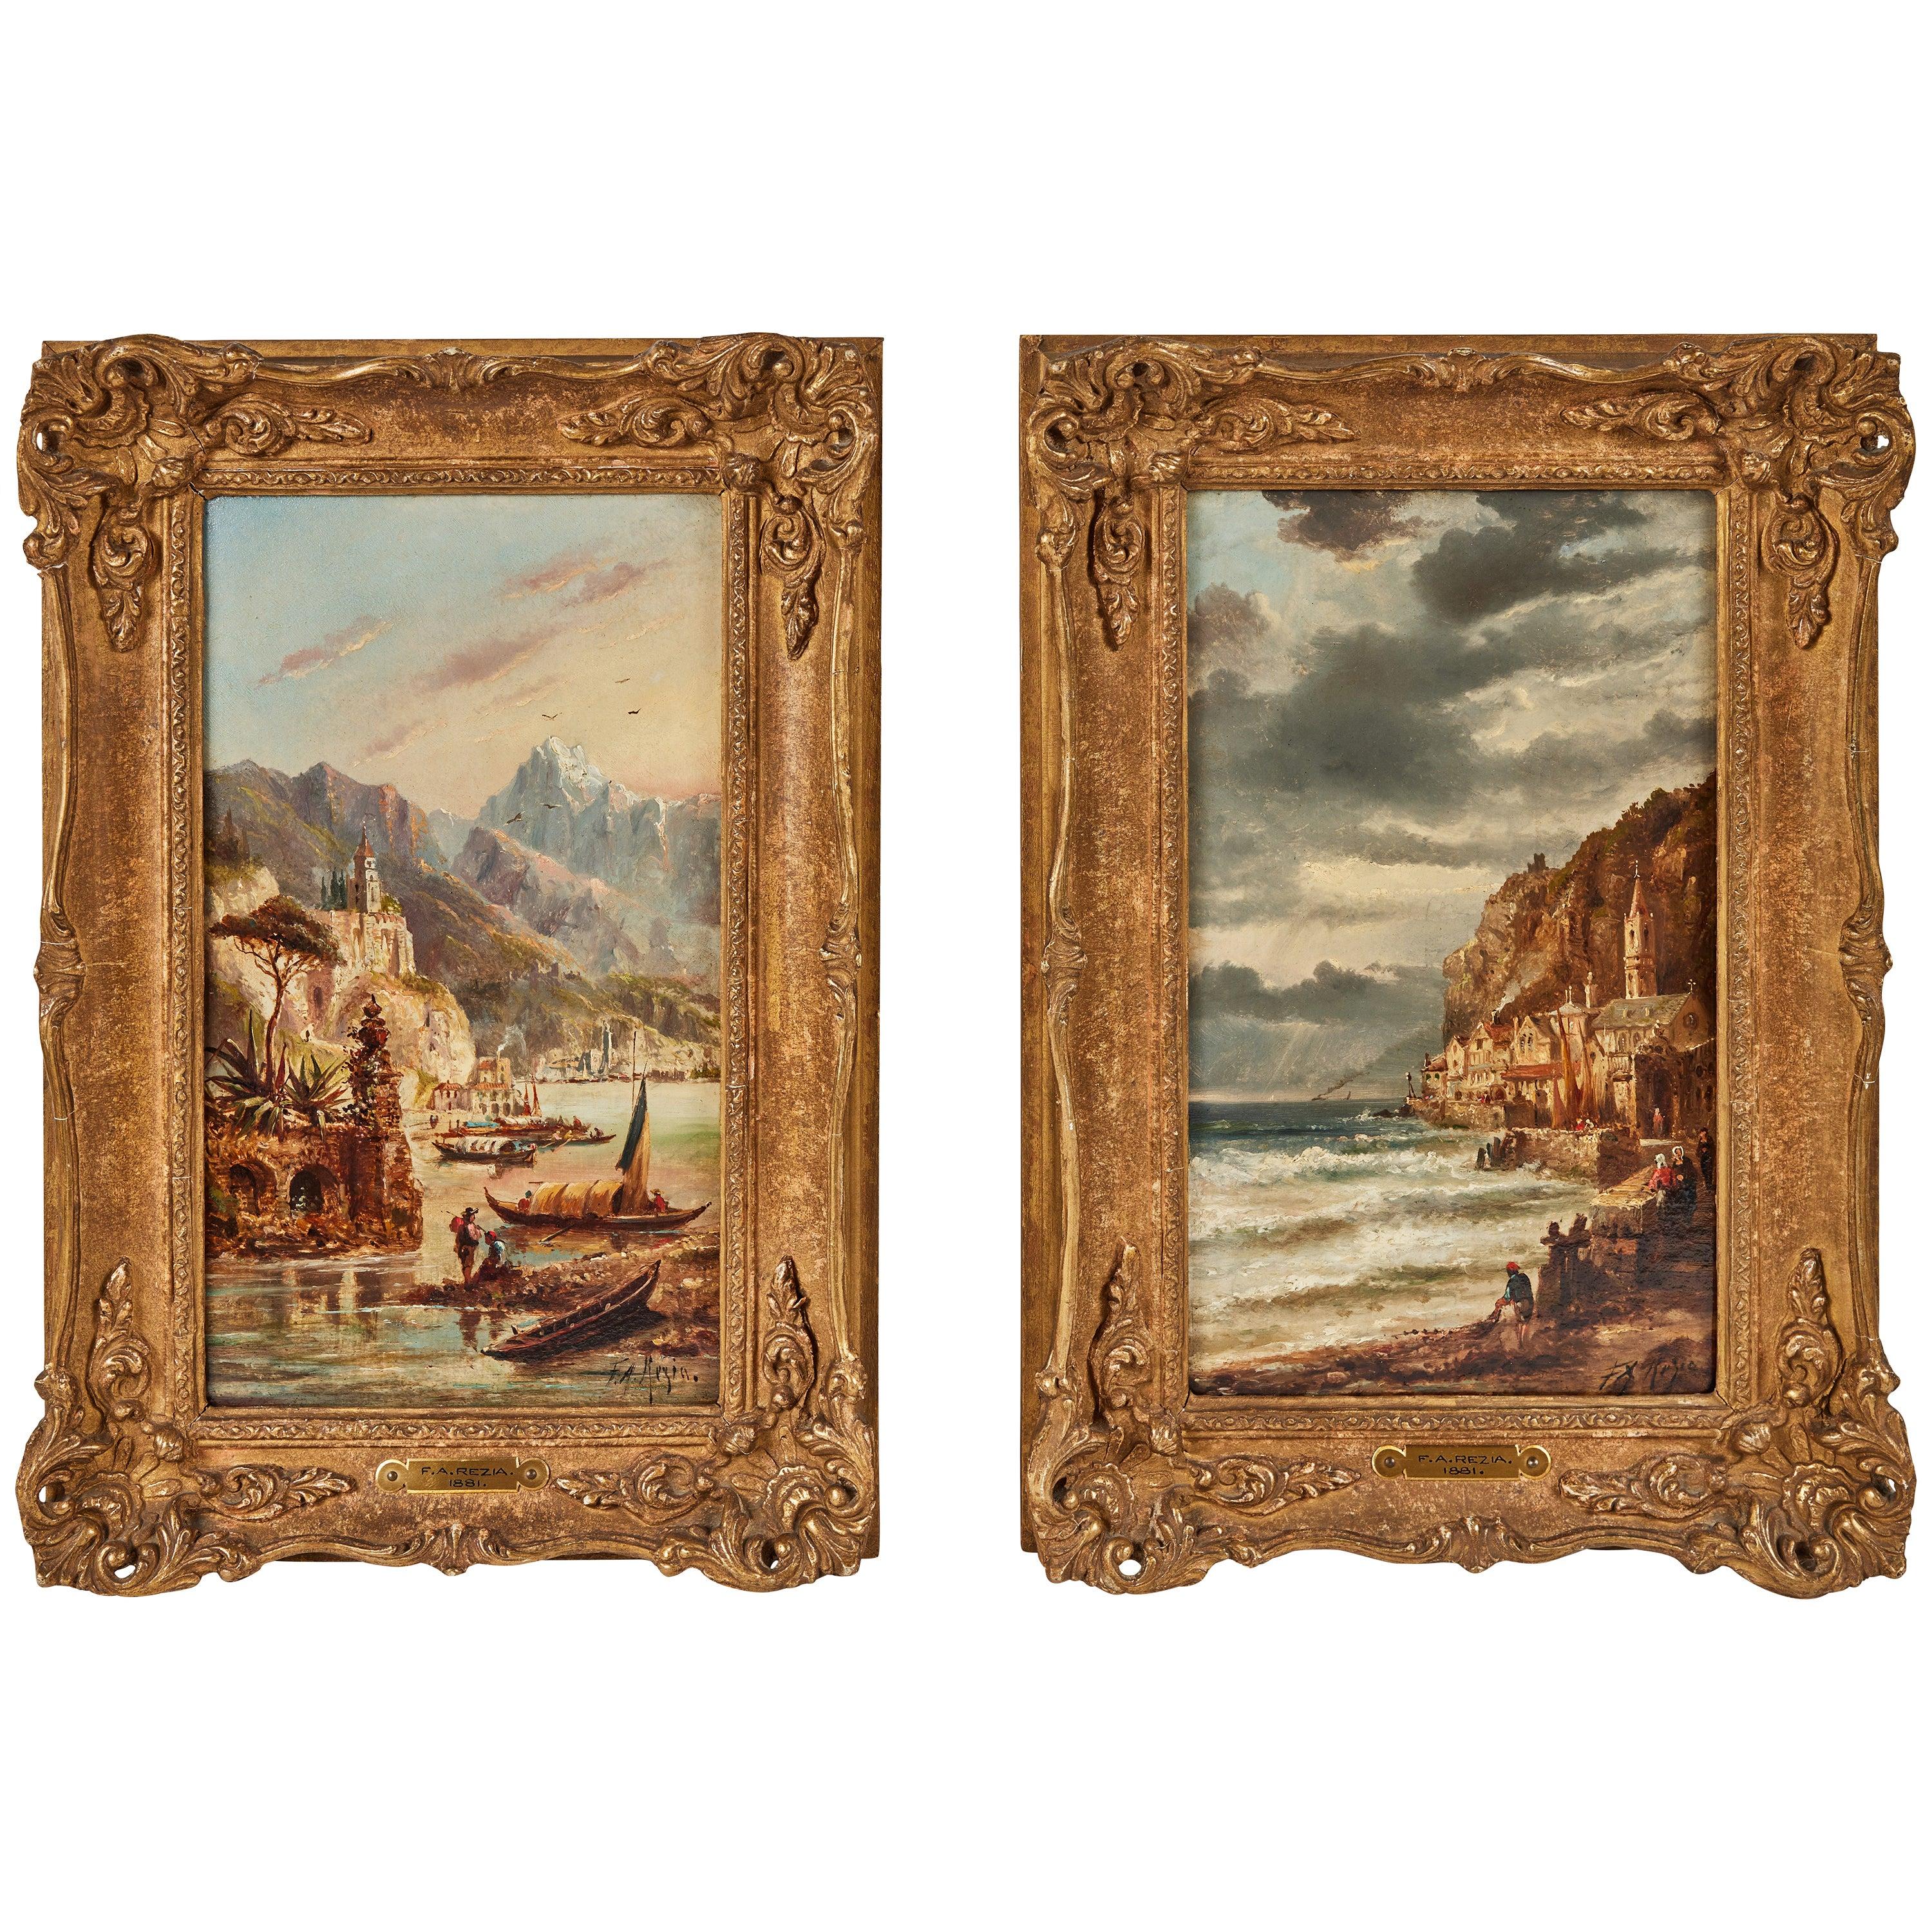 A beautifully painted, mated pair of signed 19th century, oil-on-board, Italian, atmospheric, Capriccio seascapes by listed artist, Franz Auguste Rezia  (1857-1906). Each held in period frames inset with engraved, brass plaques with artist name and